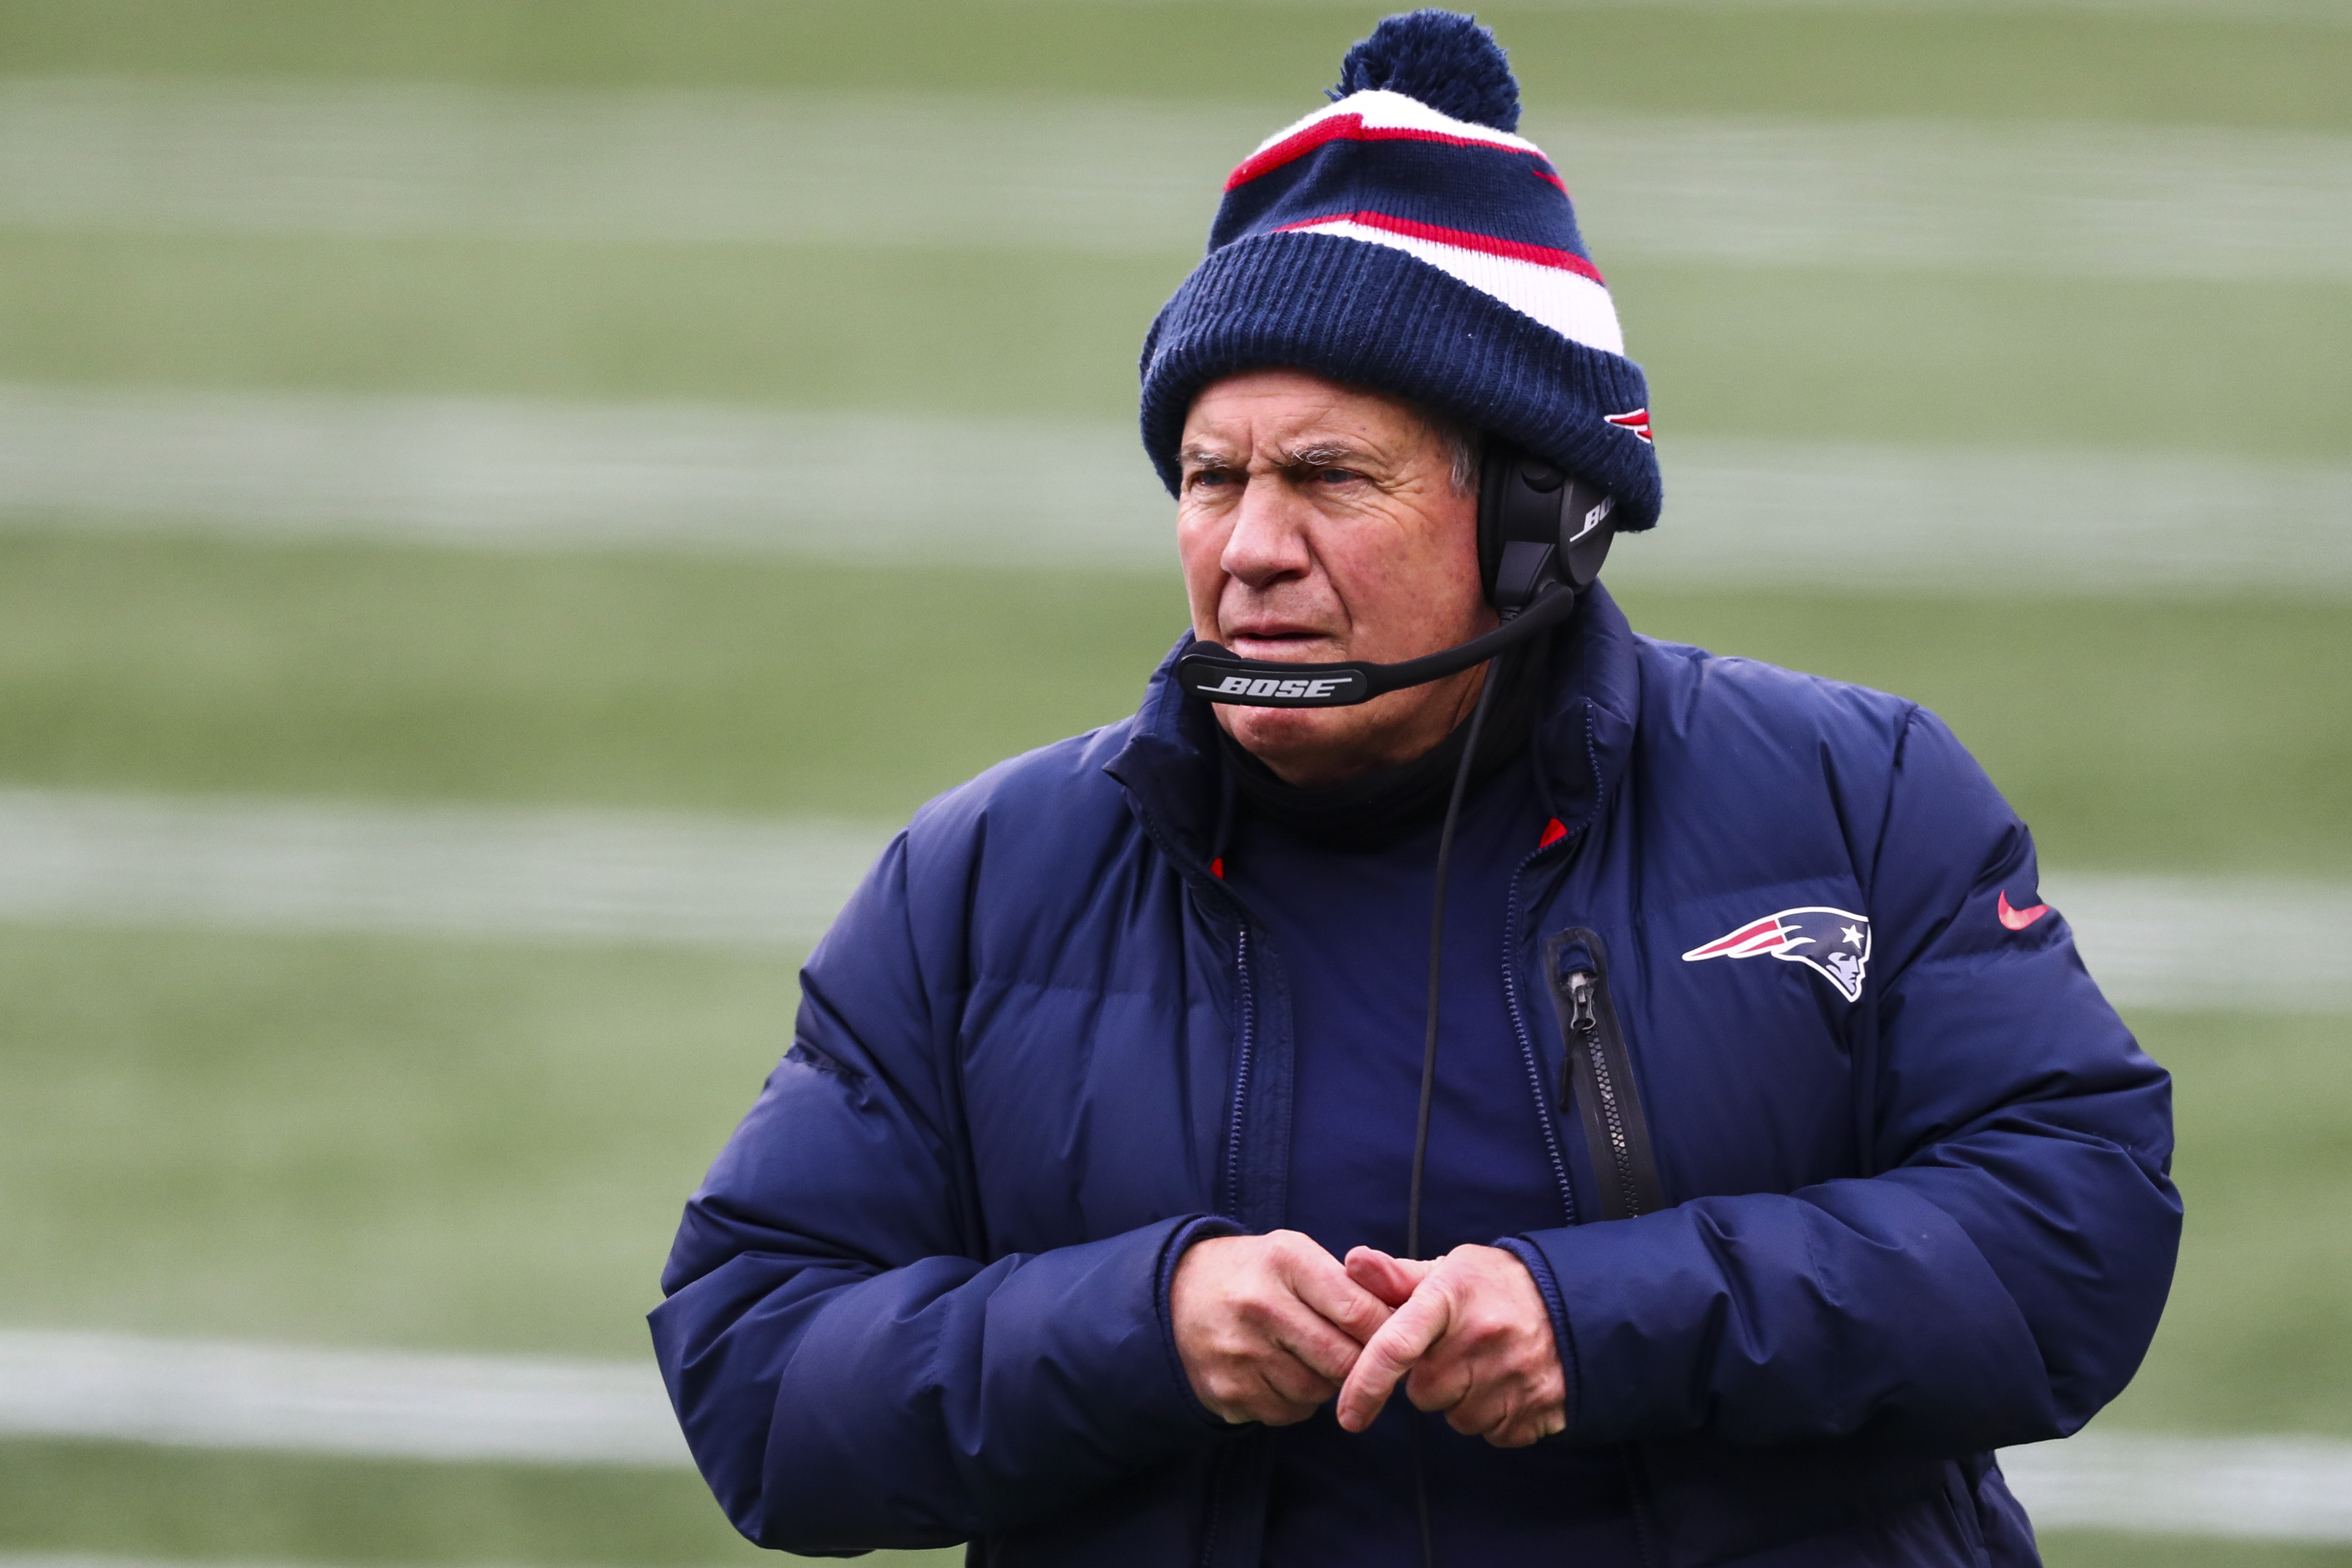 The New England Patriots made a lot of changes since last year and more are on the way, according to Bill Belichick.